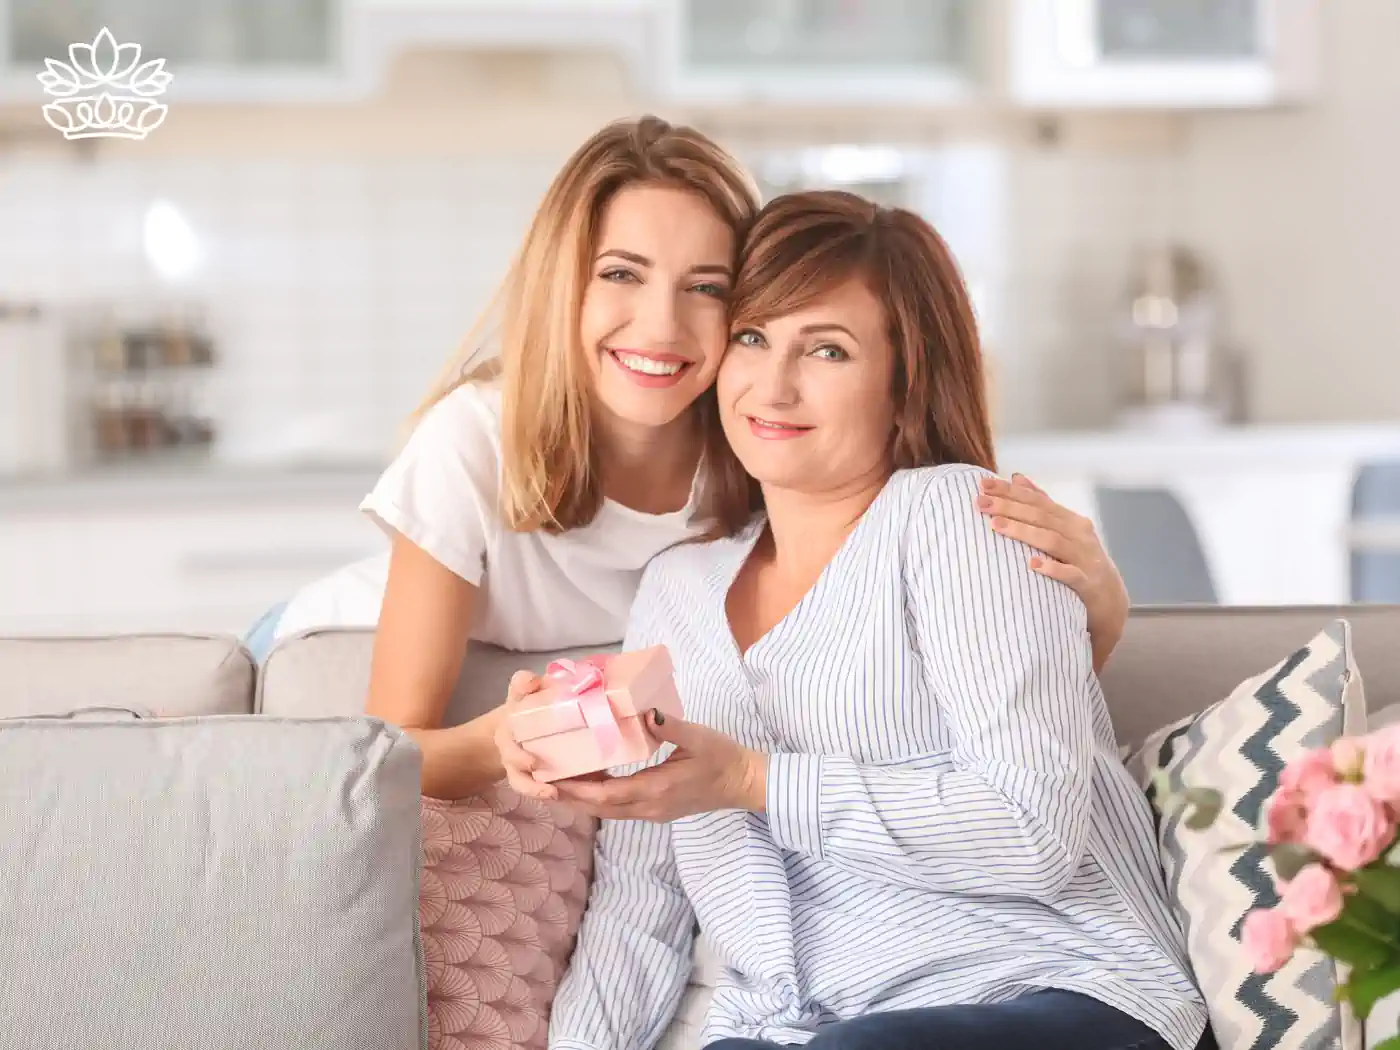 Smiling young woman presenting a small pink gift box to her delighted mother in a modern, bright living room, enhancing a moment of familial love and surprise. s.